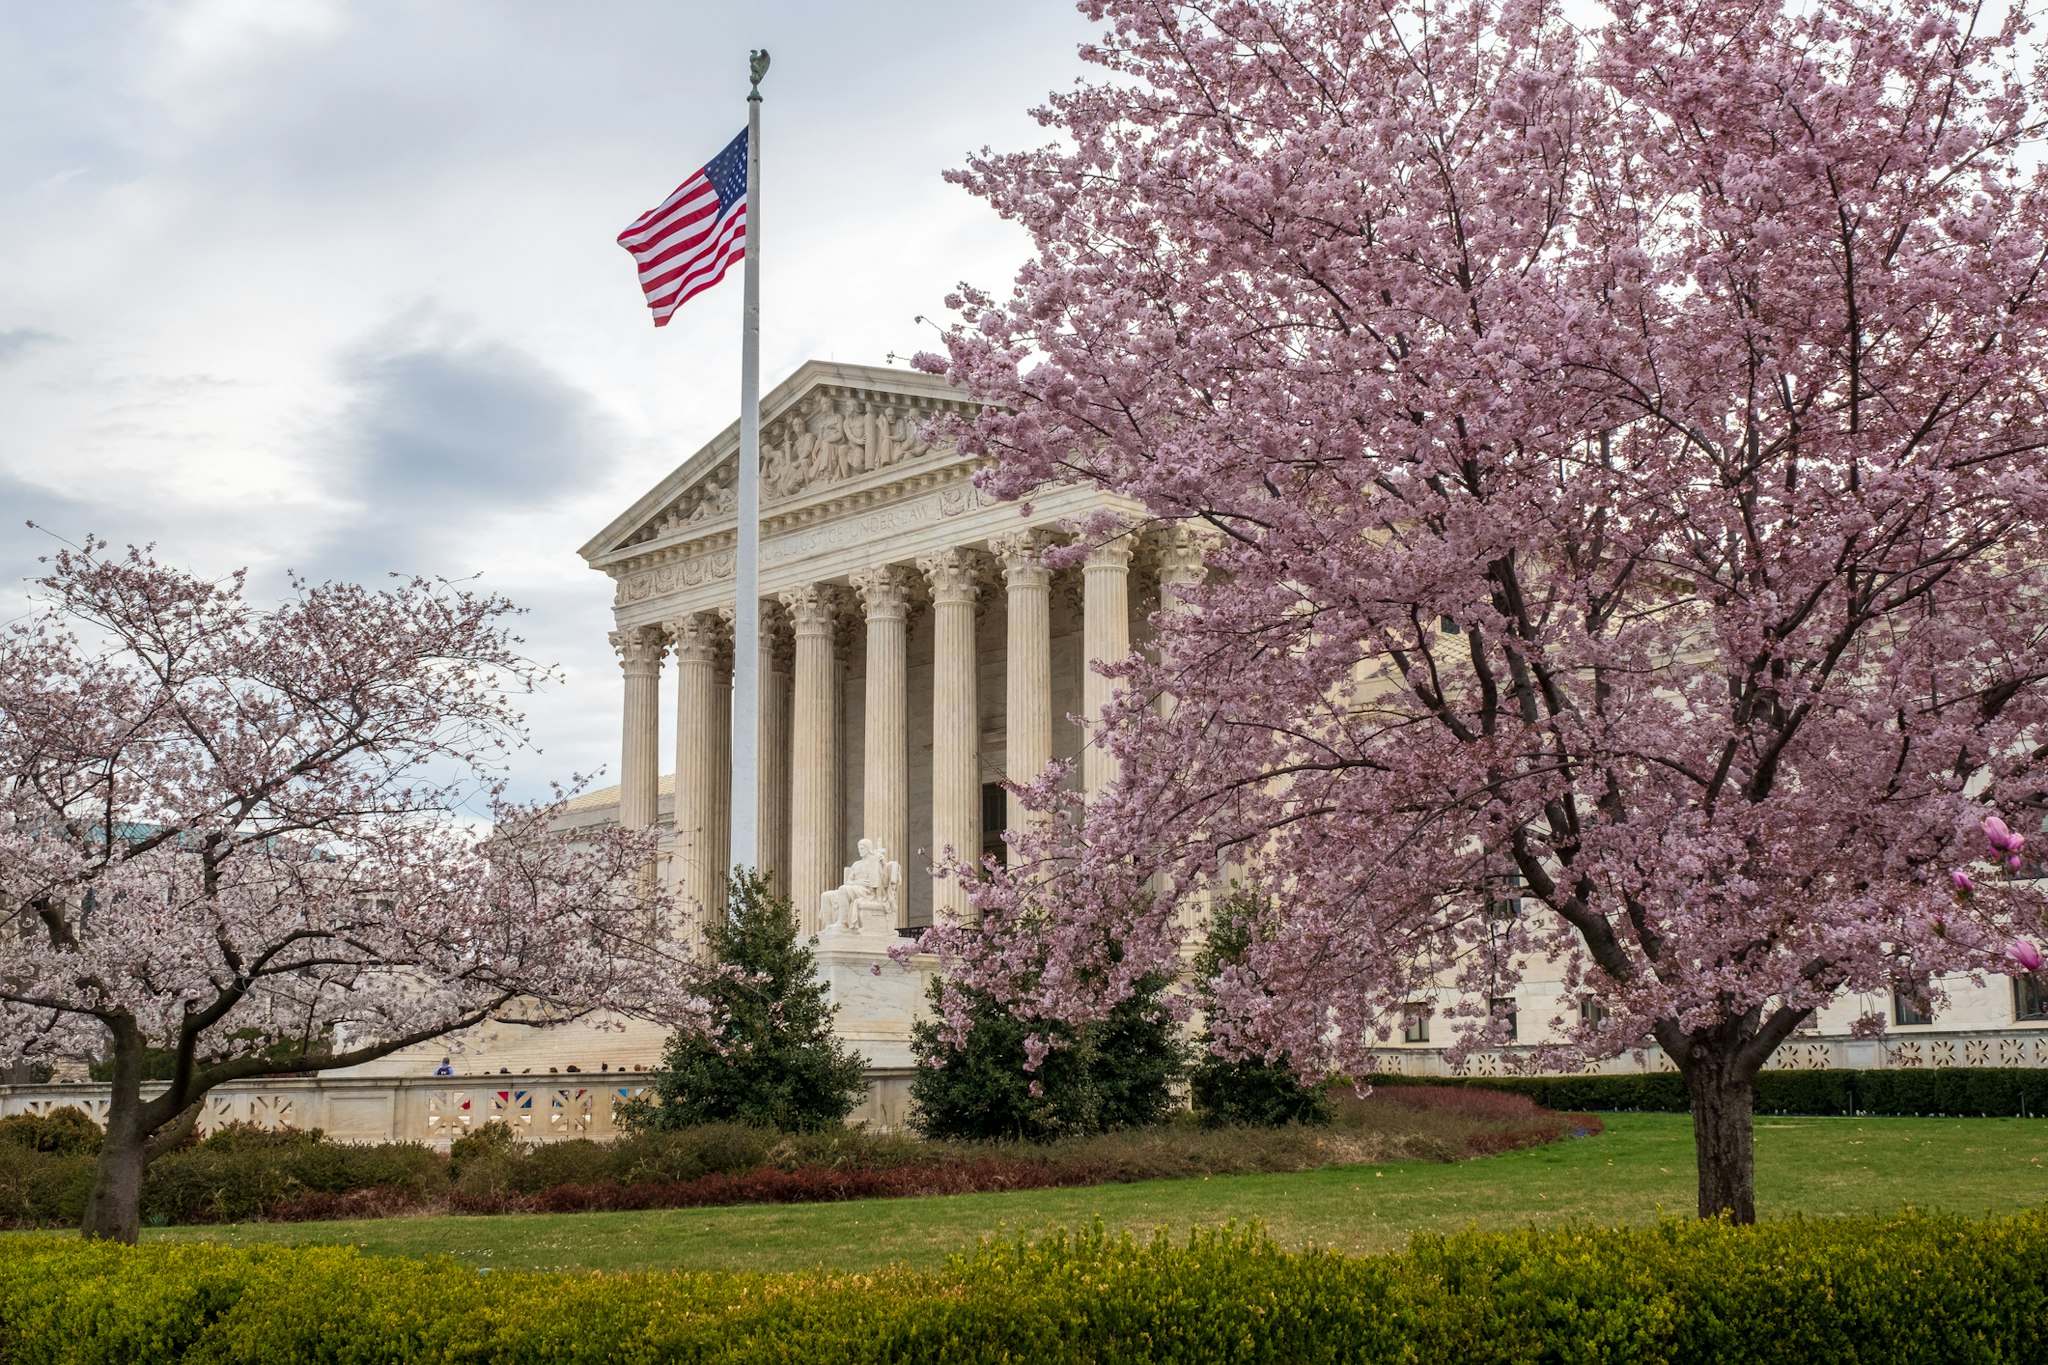 John Baggaley. Getty Images. Cherry blossoms at the Supreme Court on a windy morning in Washington, D.C.